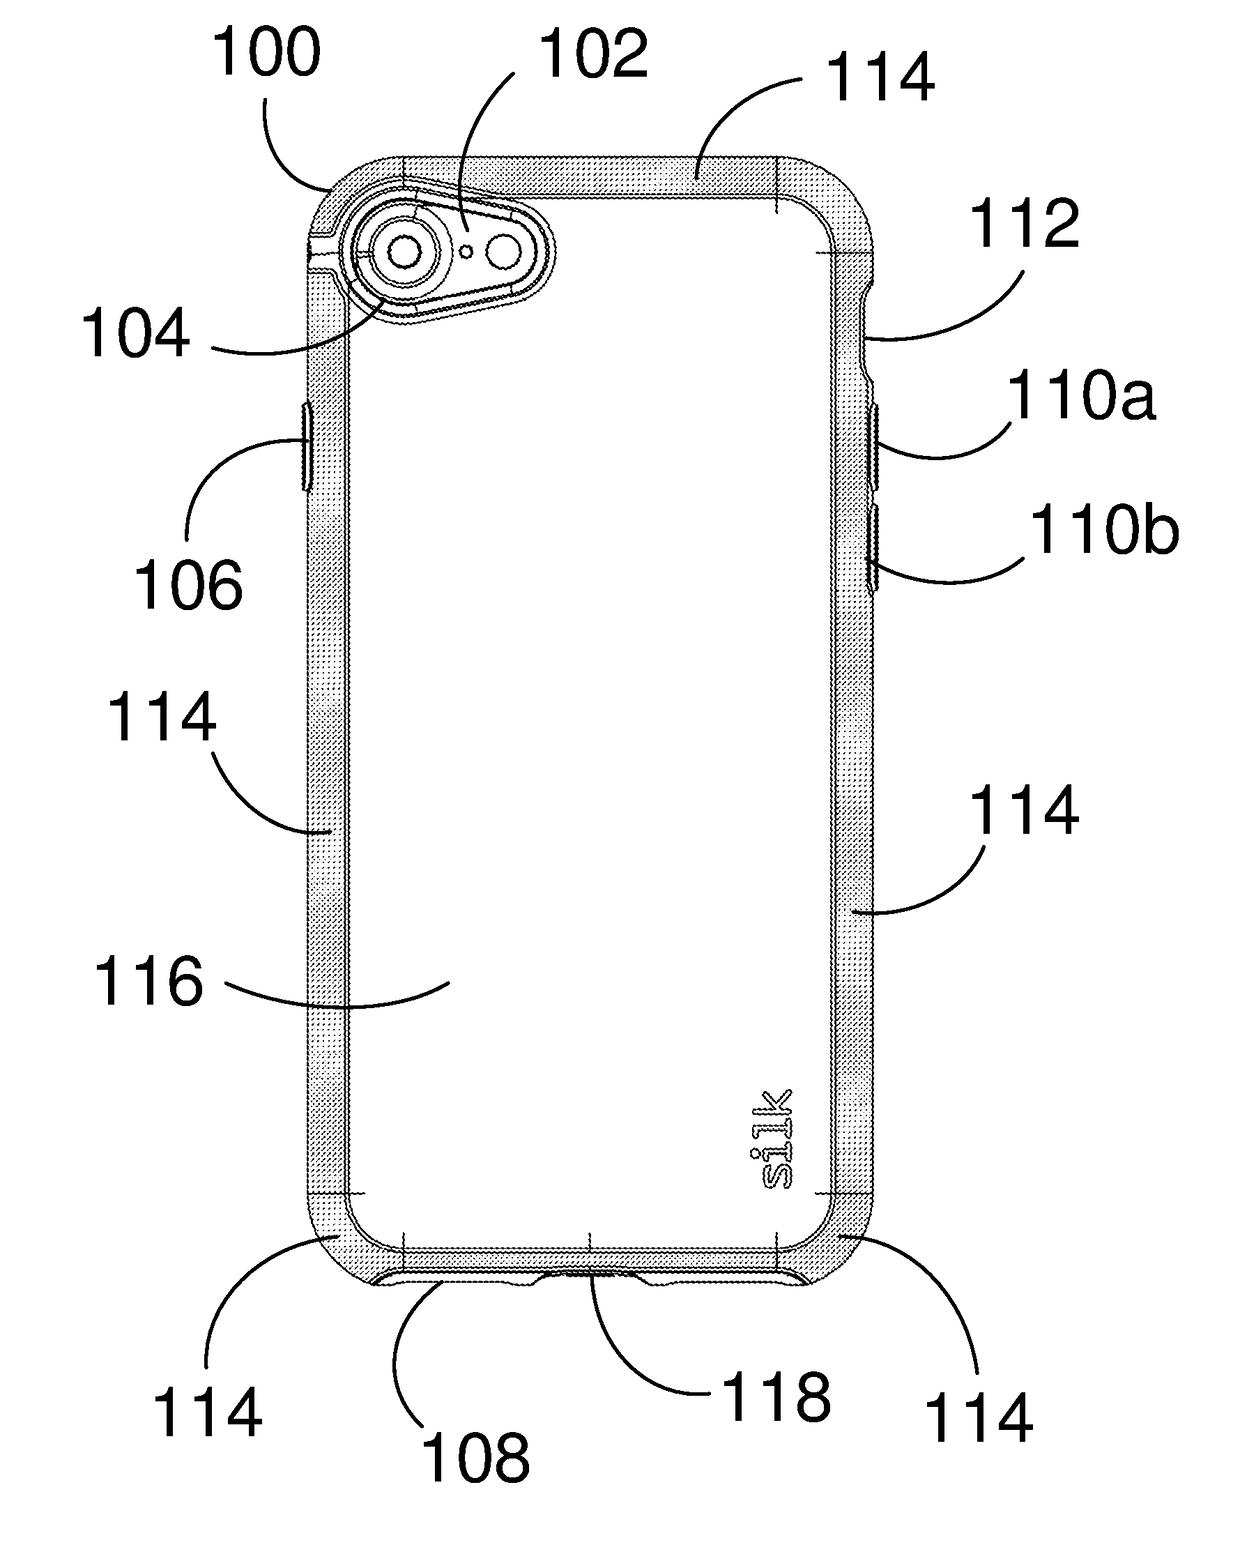 Mobile phone case with enhanced grip area and reduced grip area